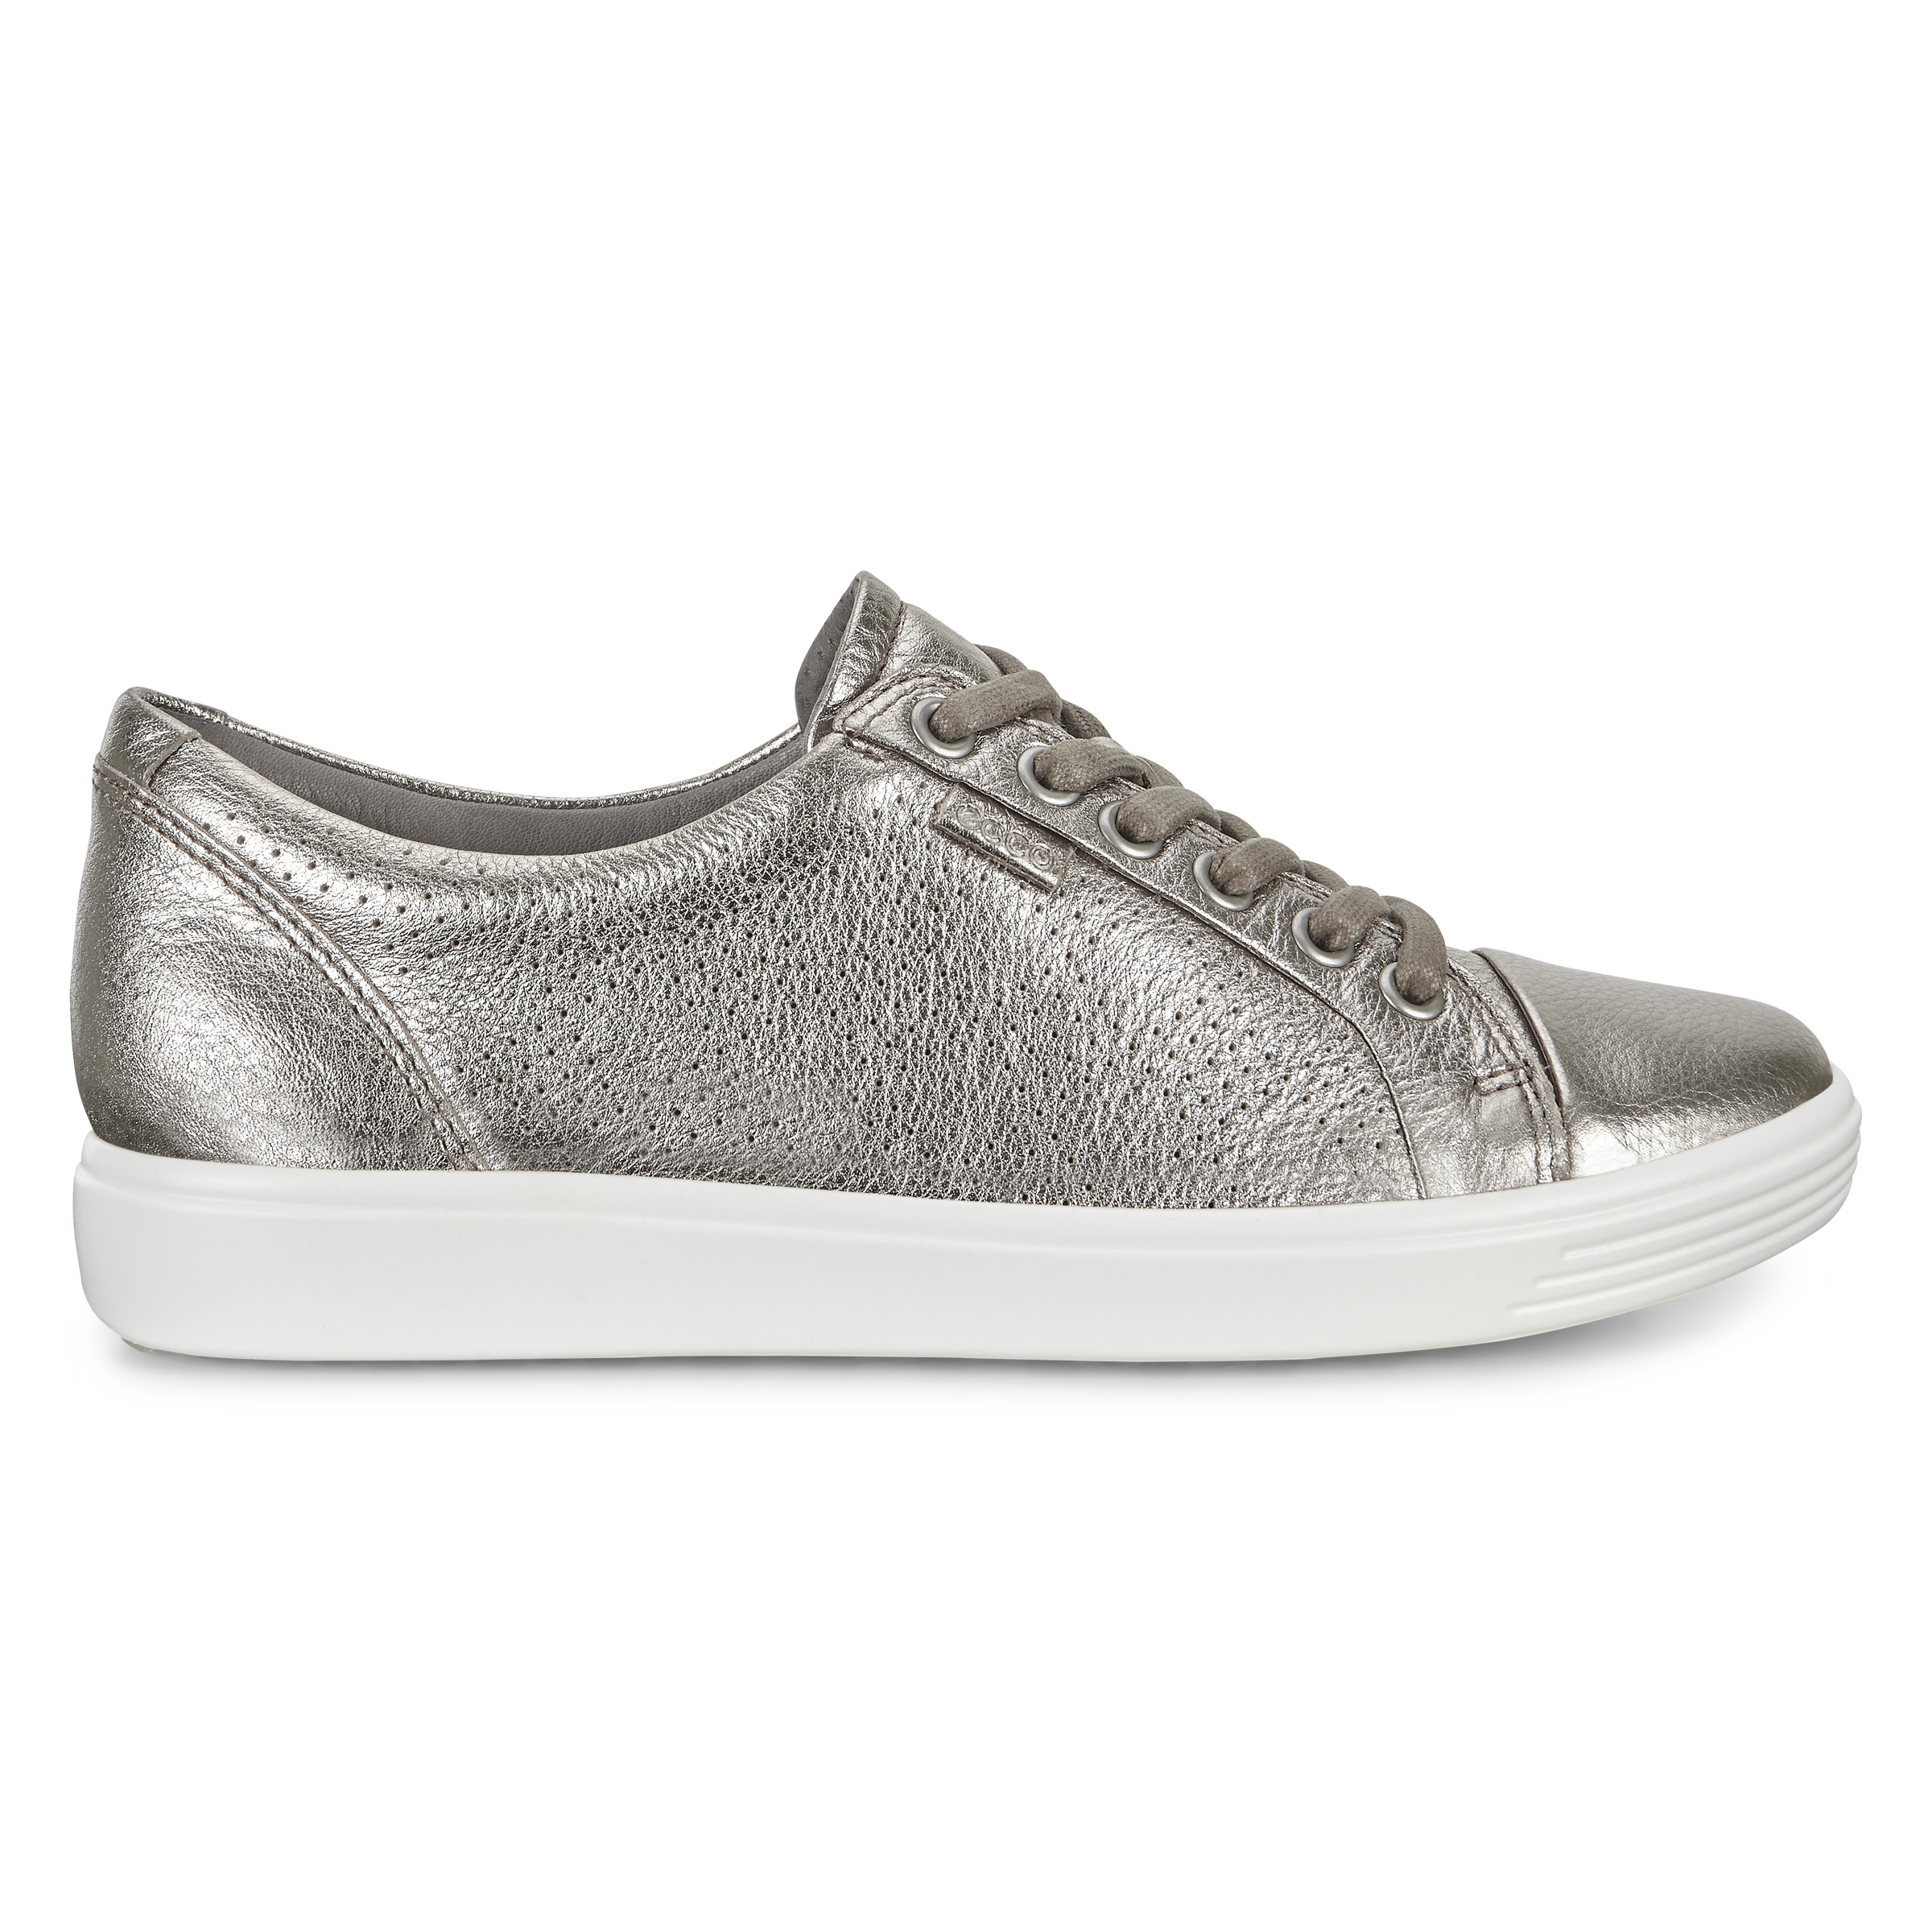 UPC 809704479316 product image for ECCO Womens Soft 7 Perf Tie Sneakers Size 7-7.5 Warm Grey | upcitemdb.com